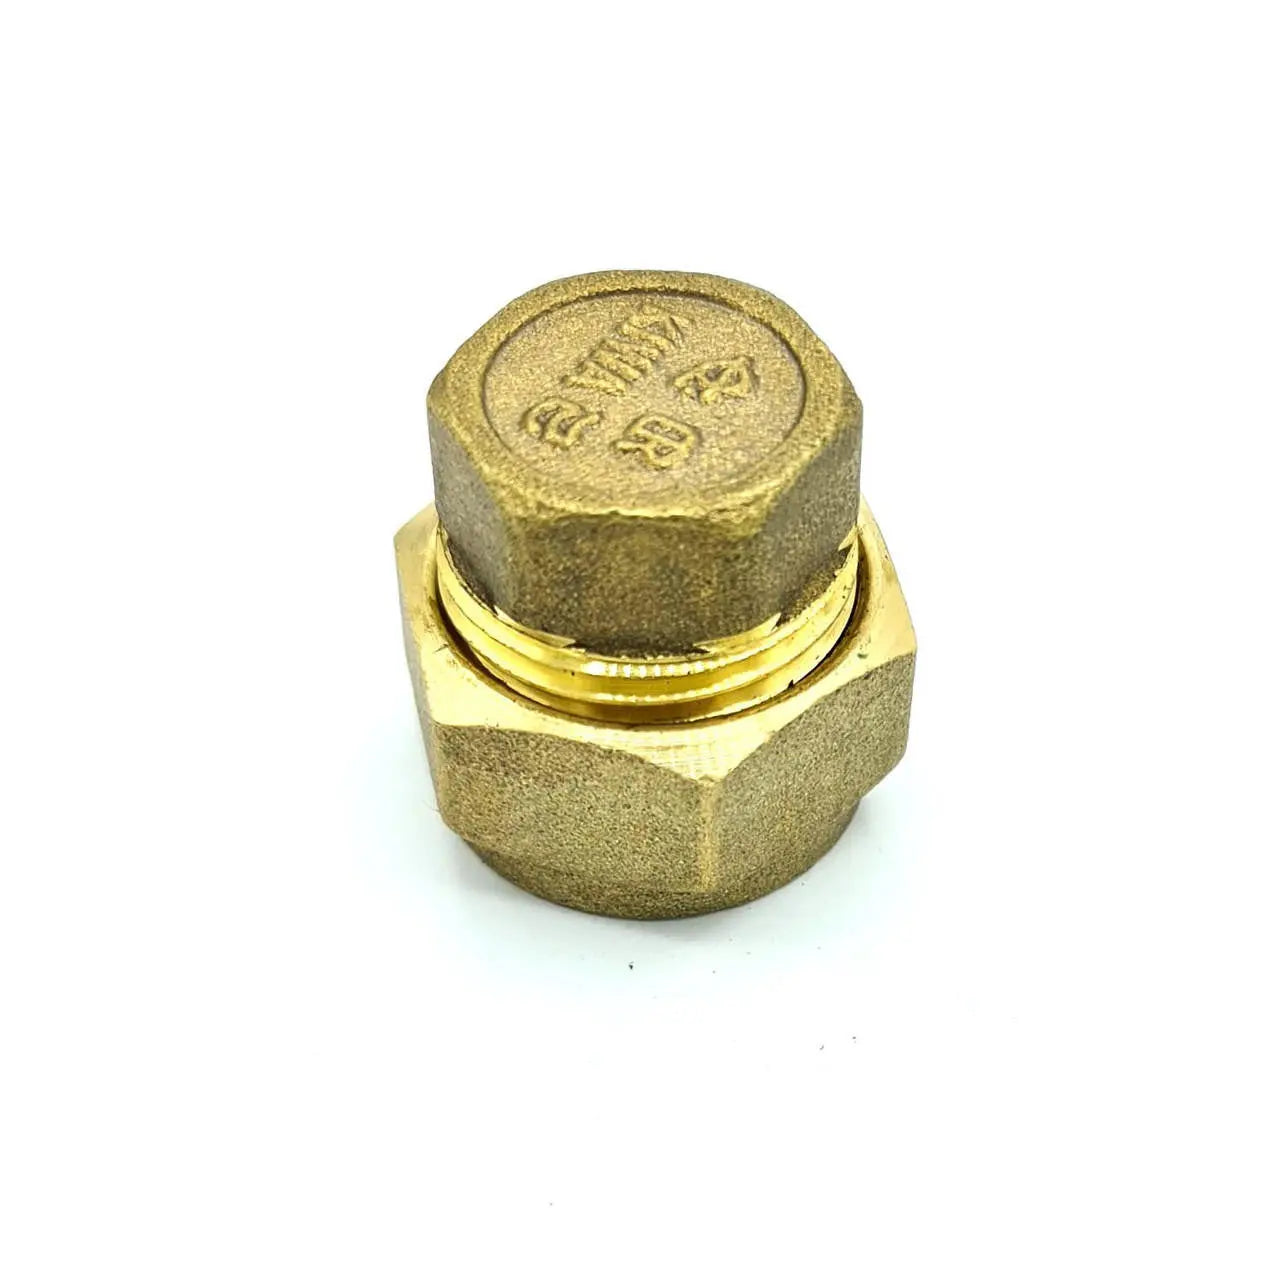 15mm Copper Pipe Ending Cap Compression Fitting Connector Compression Fittings